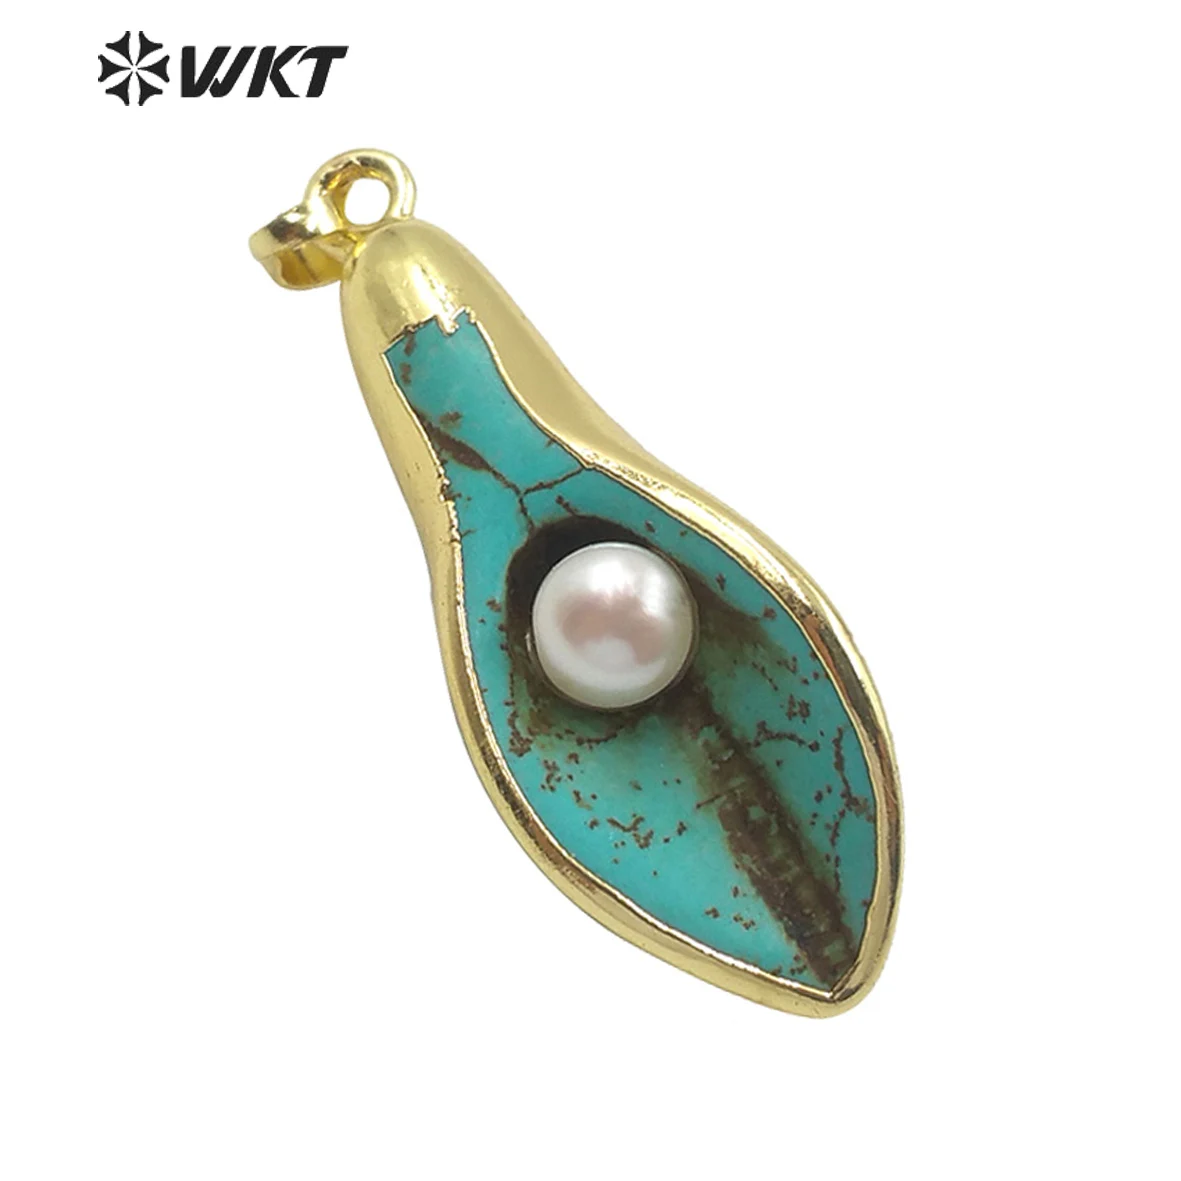 WT-P1519 WKT Special Design Glory Sape Pendant Stone With Pearl Pendant Gold Electroplated Fashion Pendant Jewelry Finding